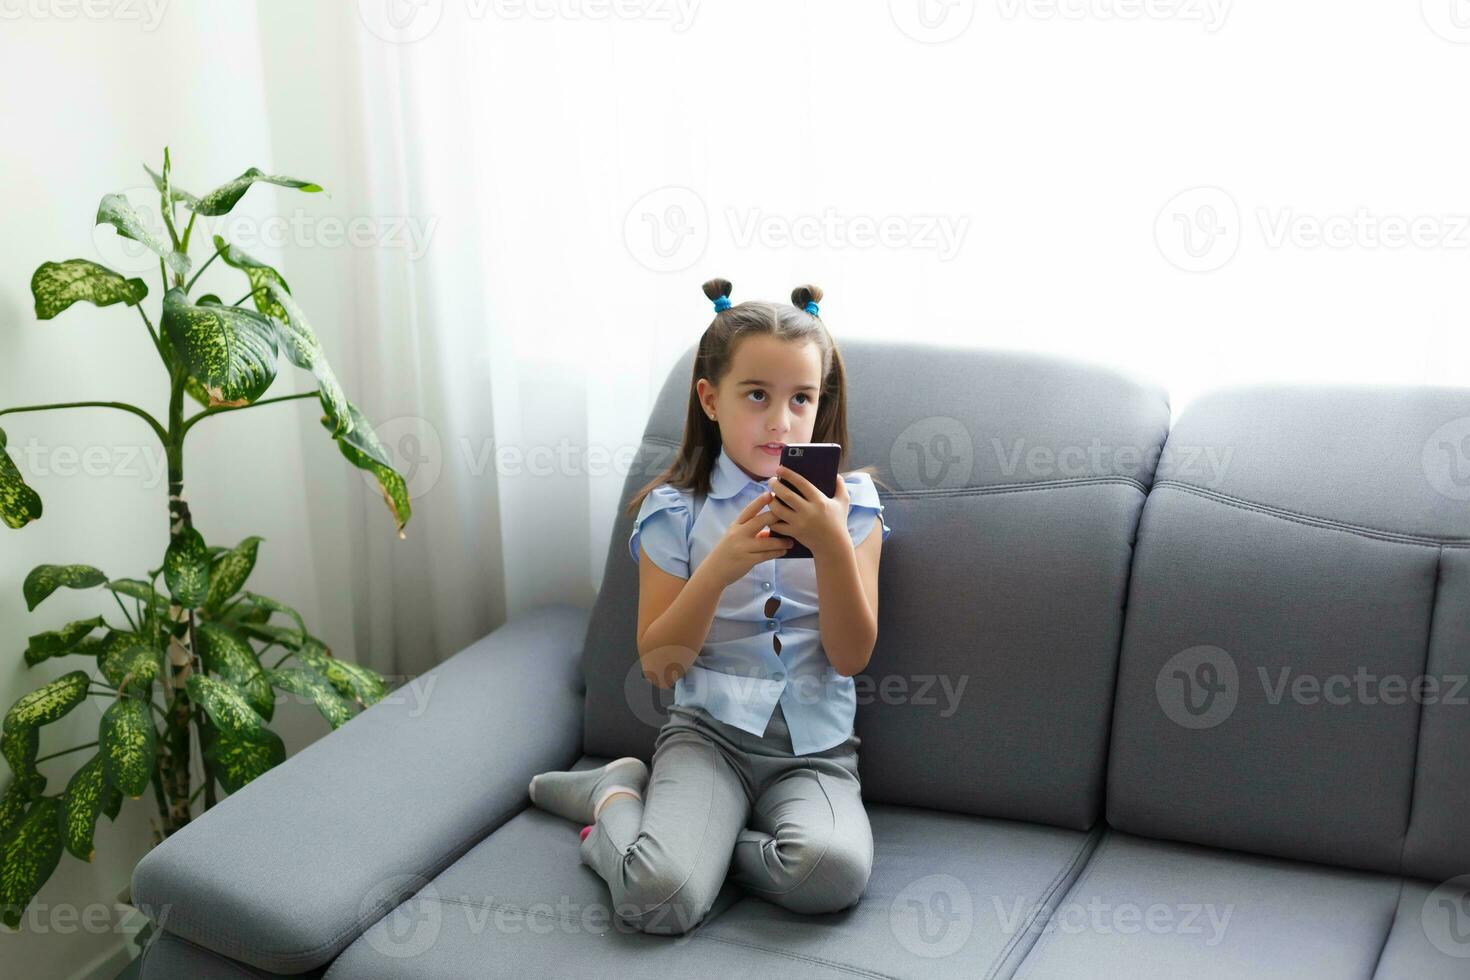 Distance learning, online education for kids. Little girl studying at home in front of the smartphone. Child watching online cartoons, kids computer addiction, parental control. Quarantine at home photo